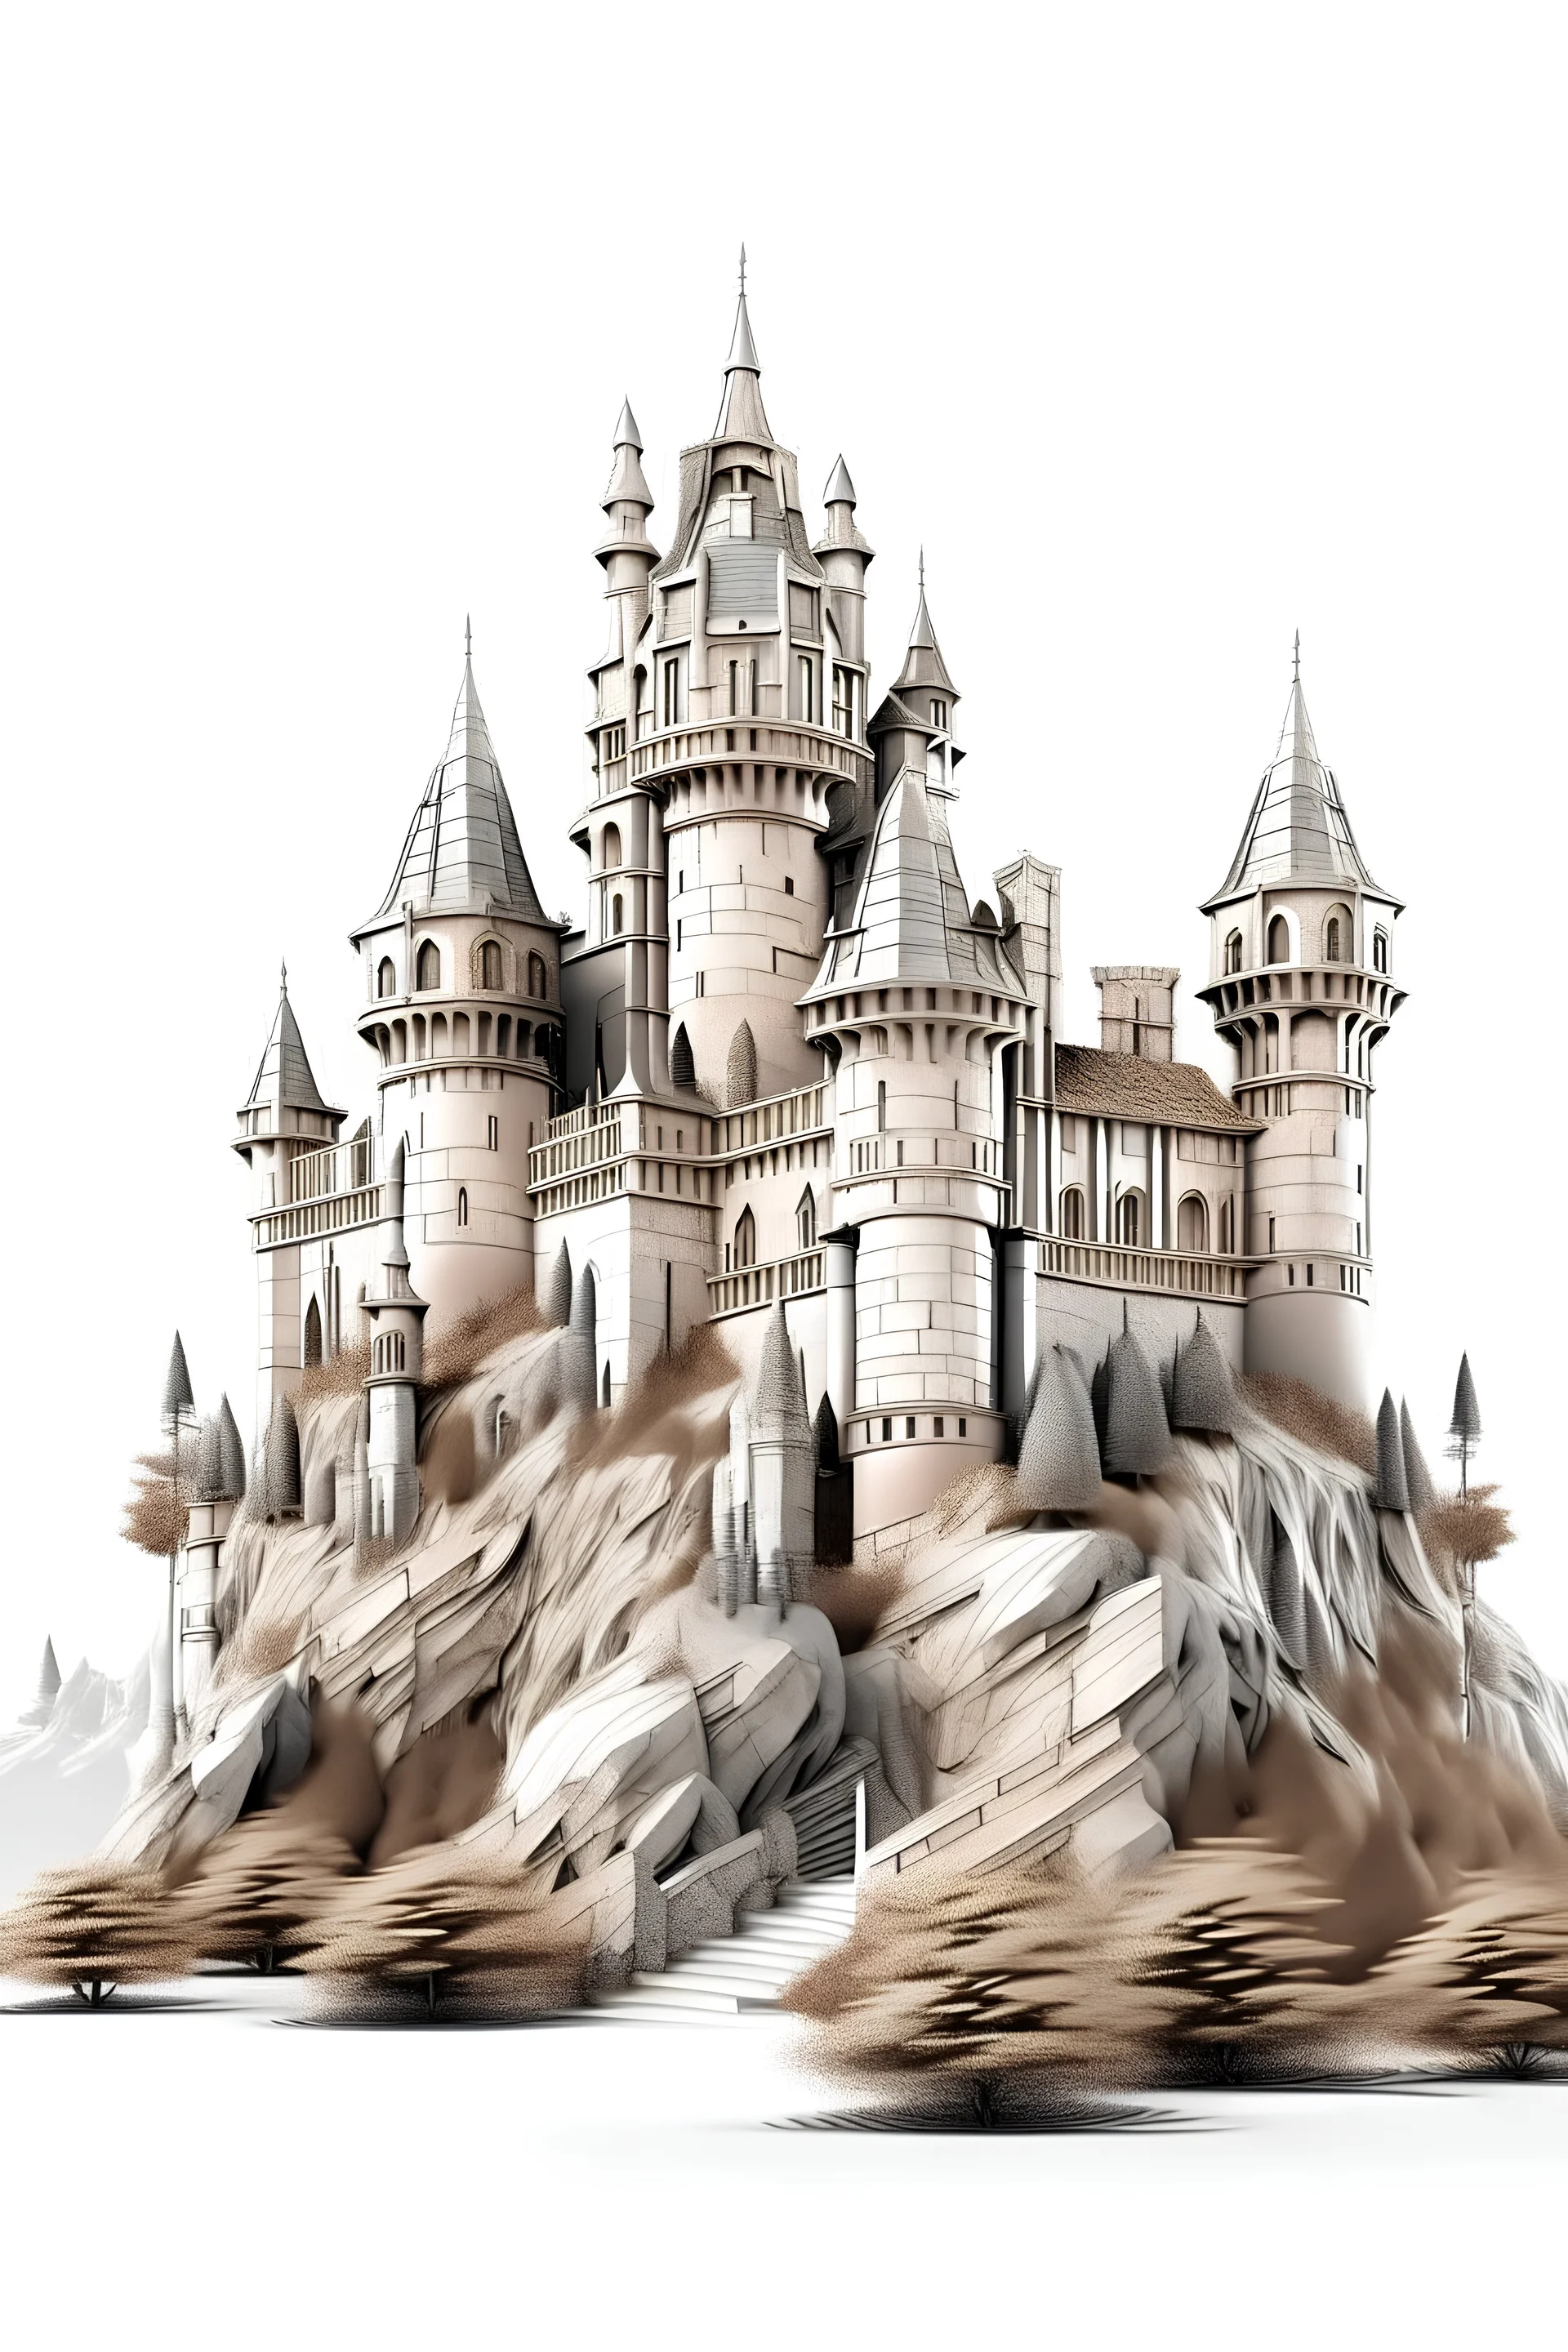 castle on the hill brown and gray shades on a white background in futuristic style